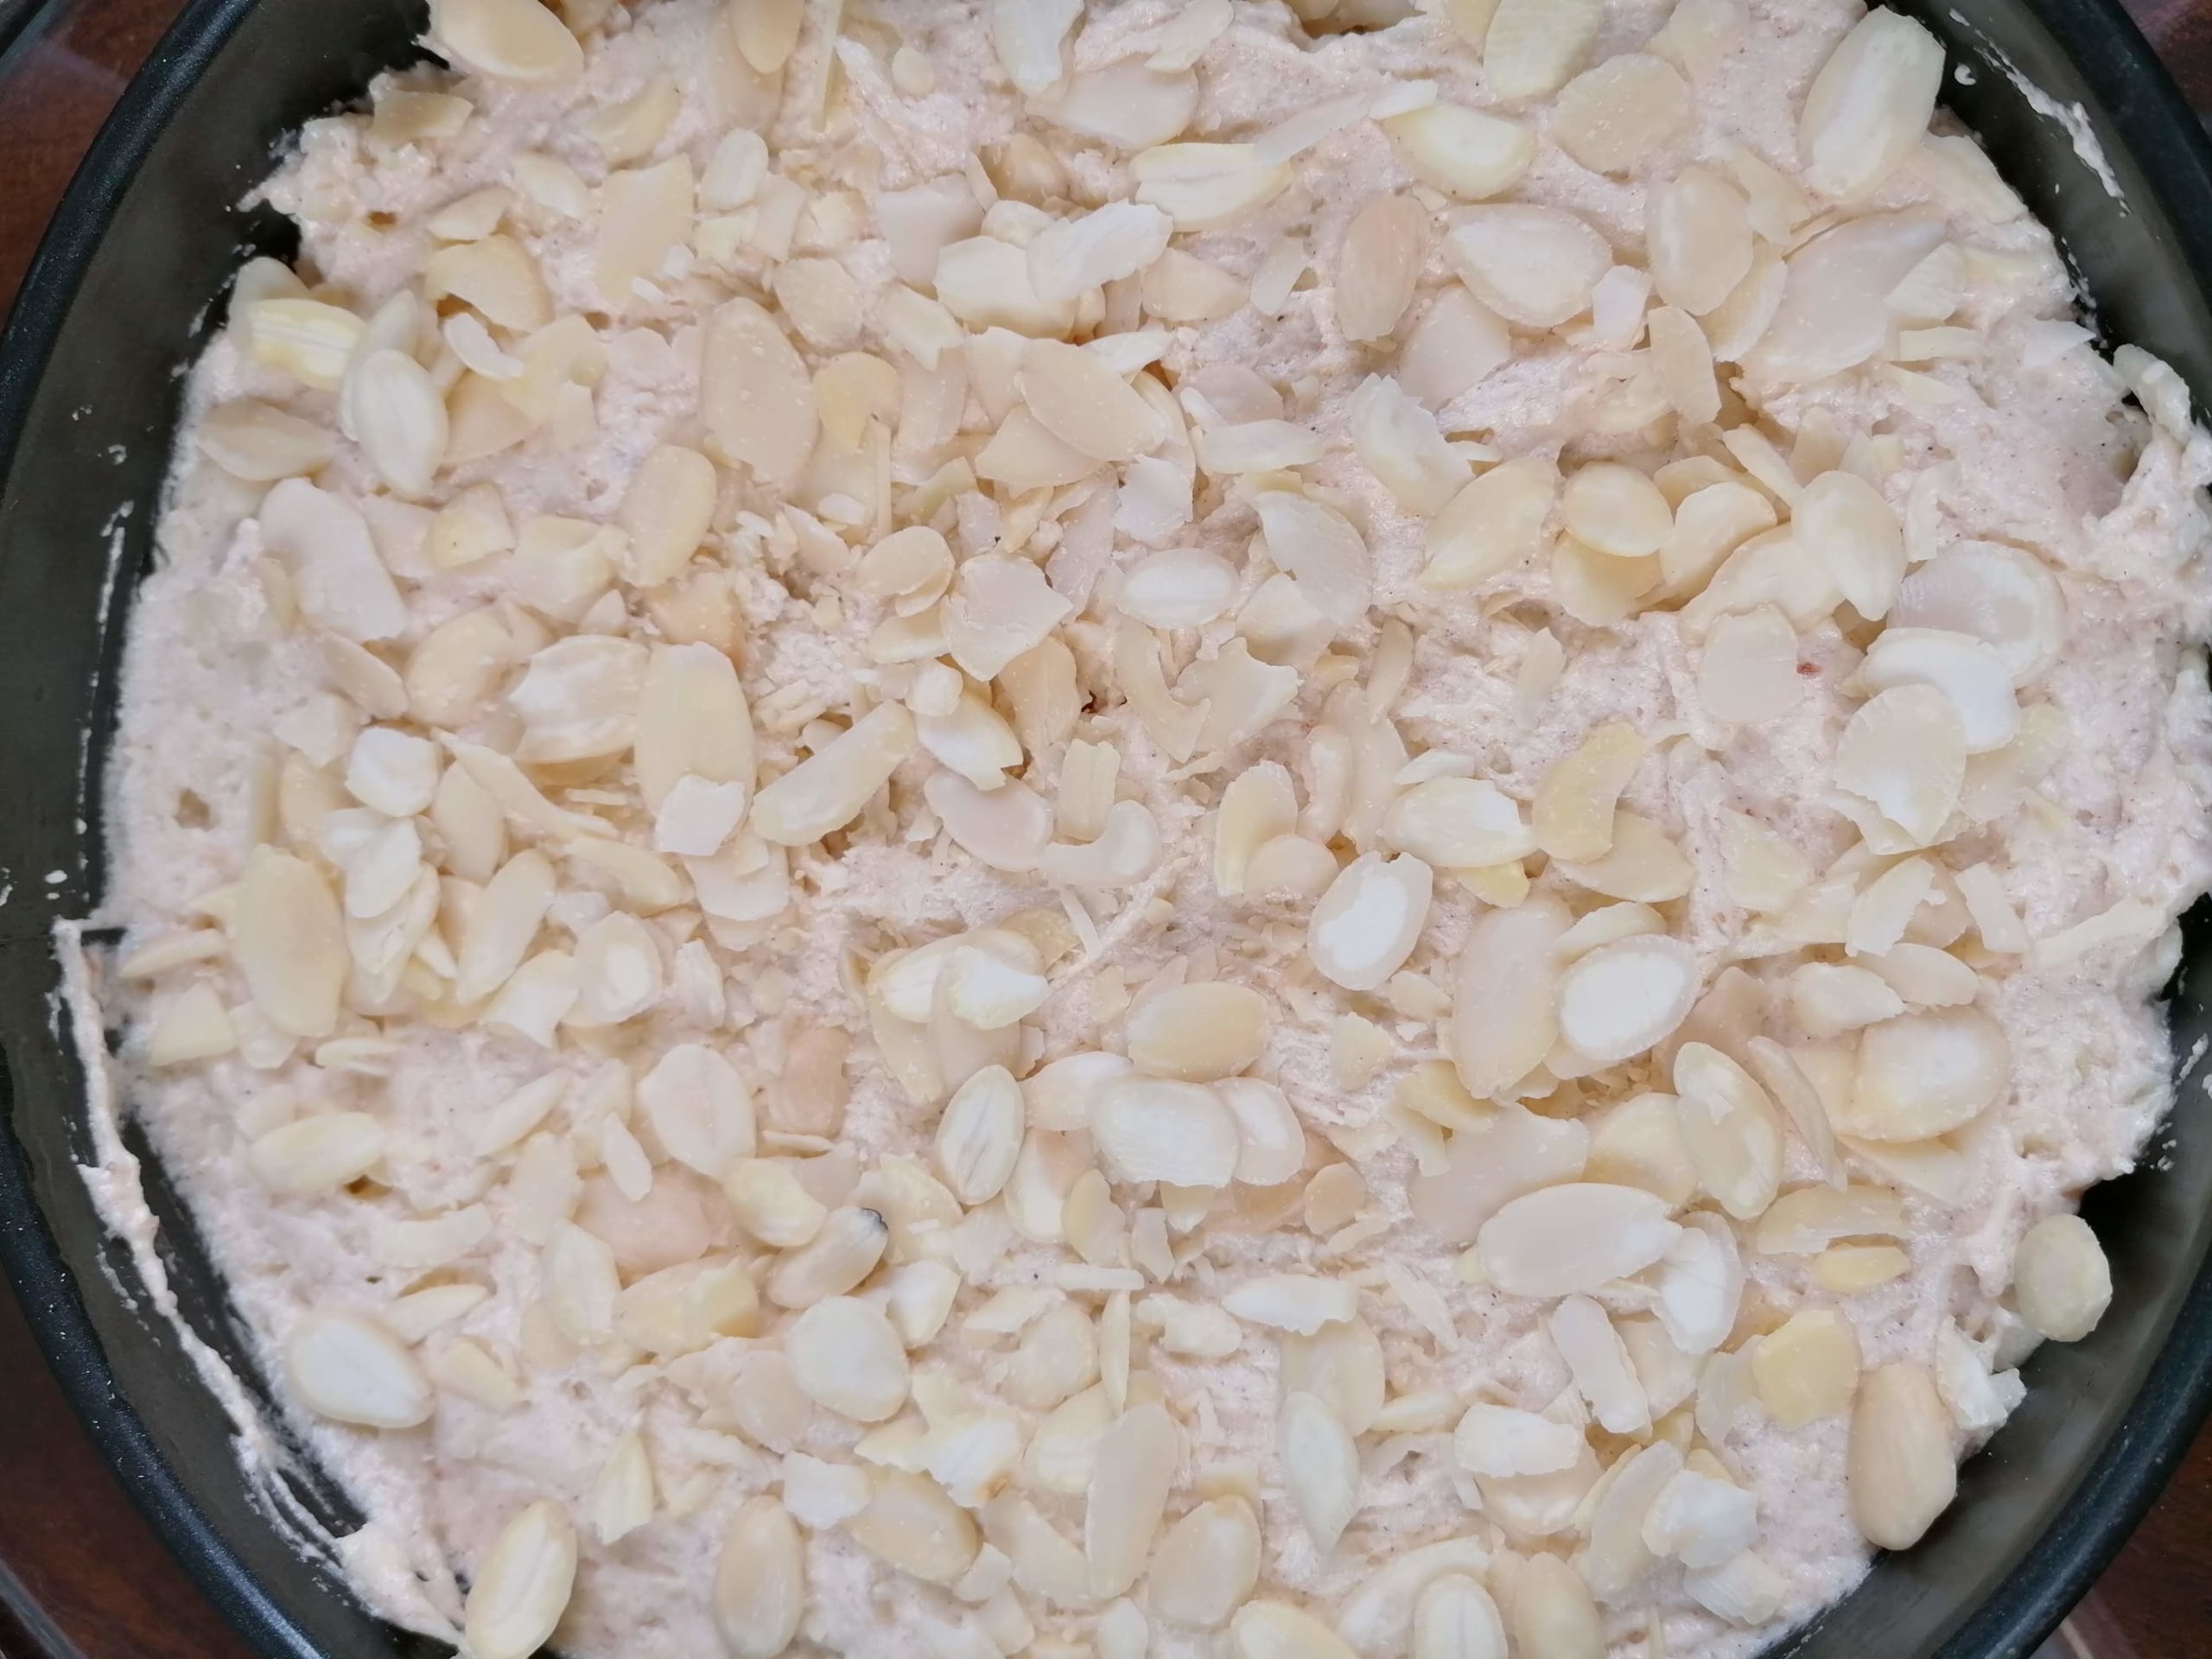 An image of the uncooked apple cake, sprinkled with flaked almonds ready for the oven.